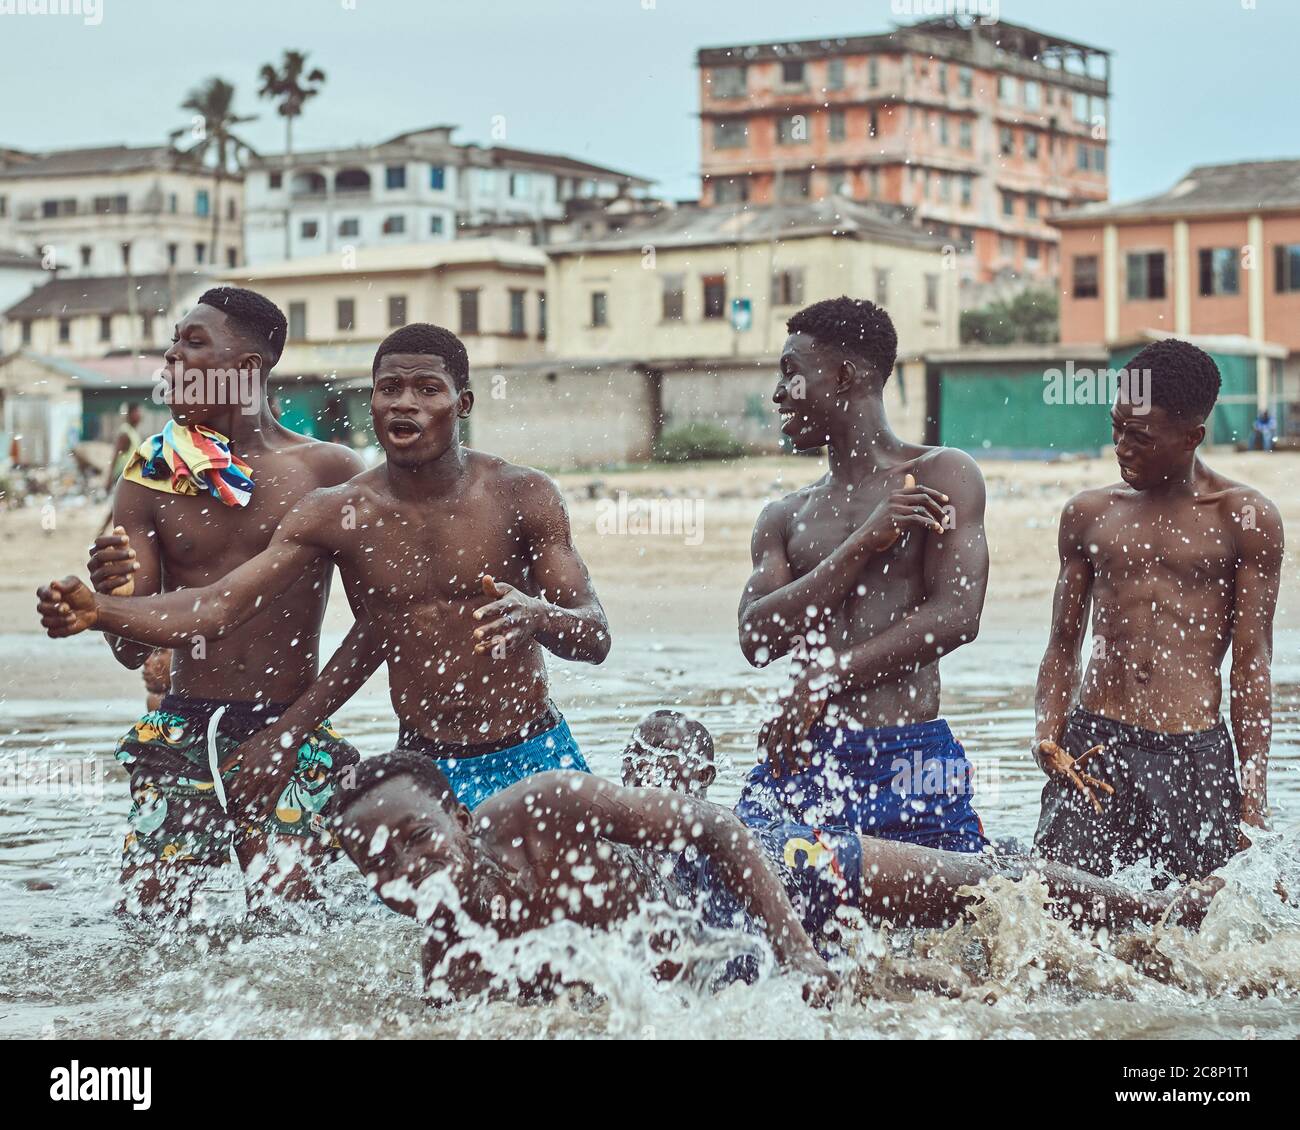 Teenage boys playing in a river during Covd-19 pandemic. Stock Photo